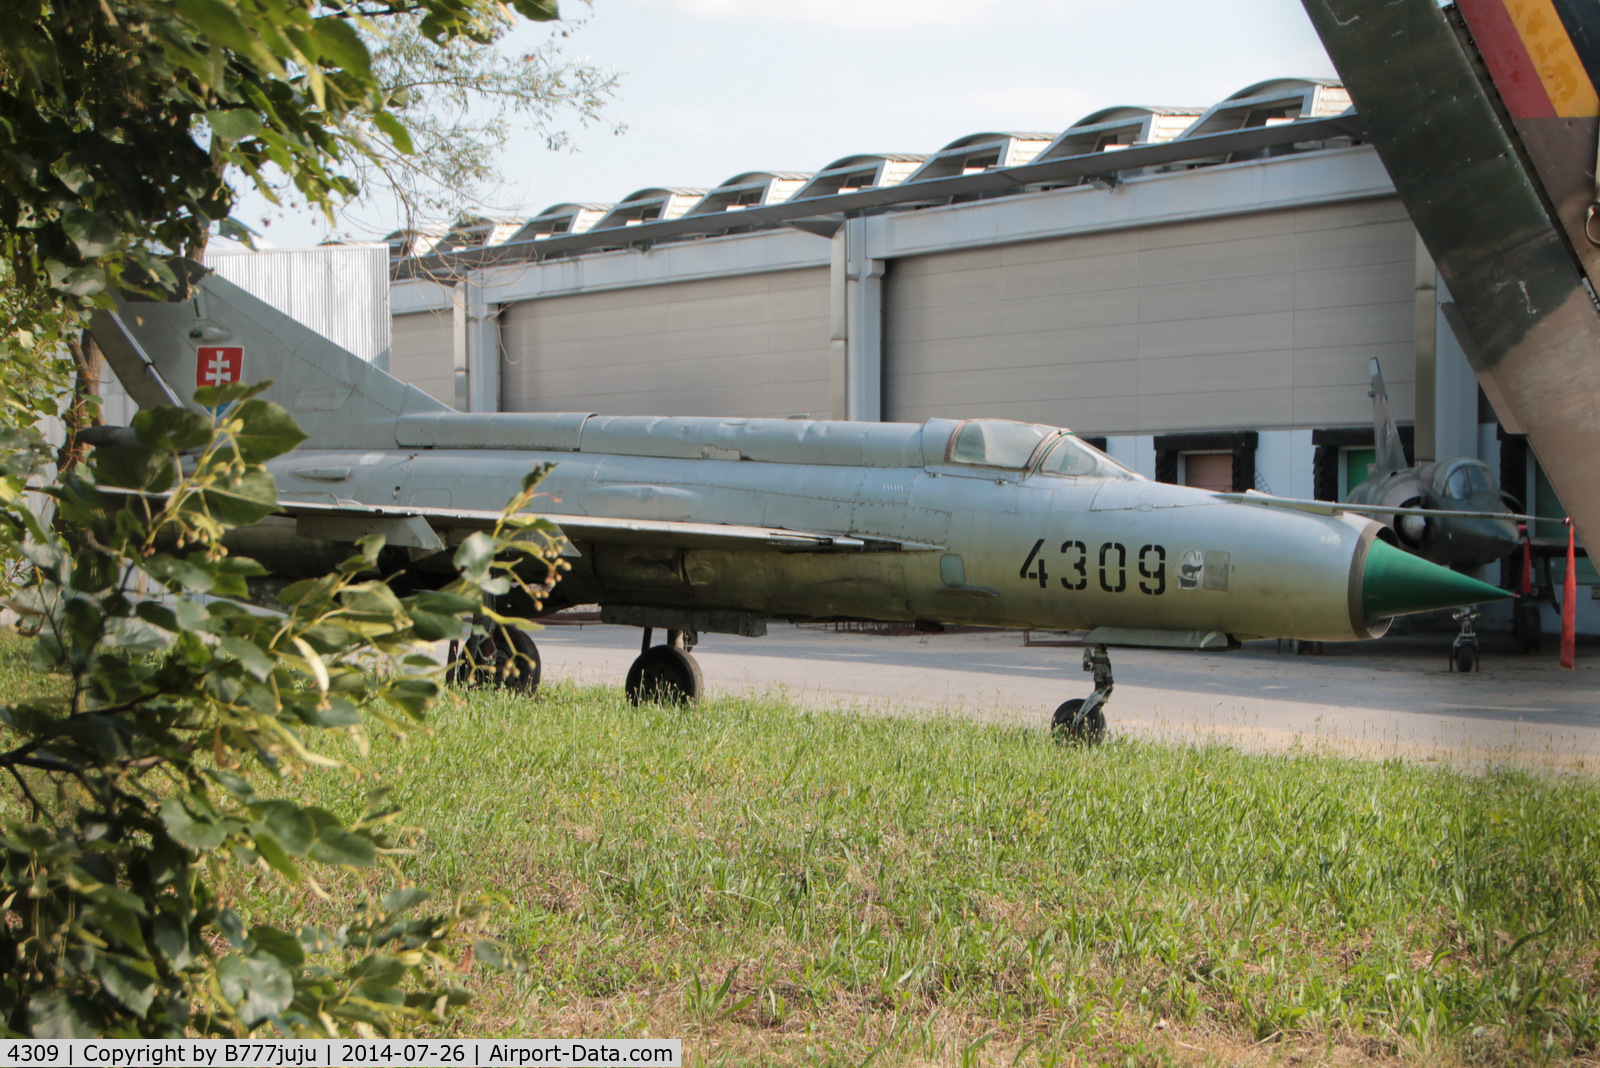 4309, Mikoyan-Gurevich MiG-21MF C/N 964309, store at Croissy-Beaubourg